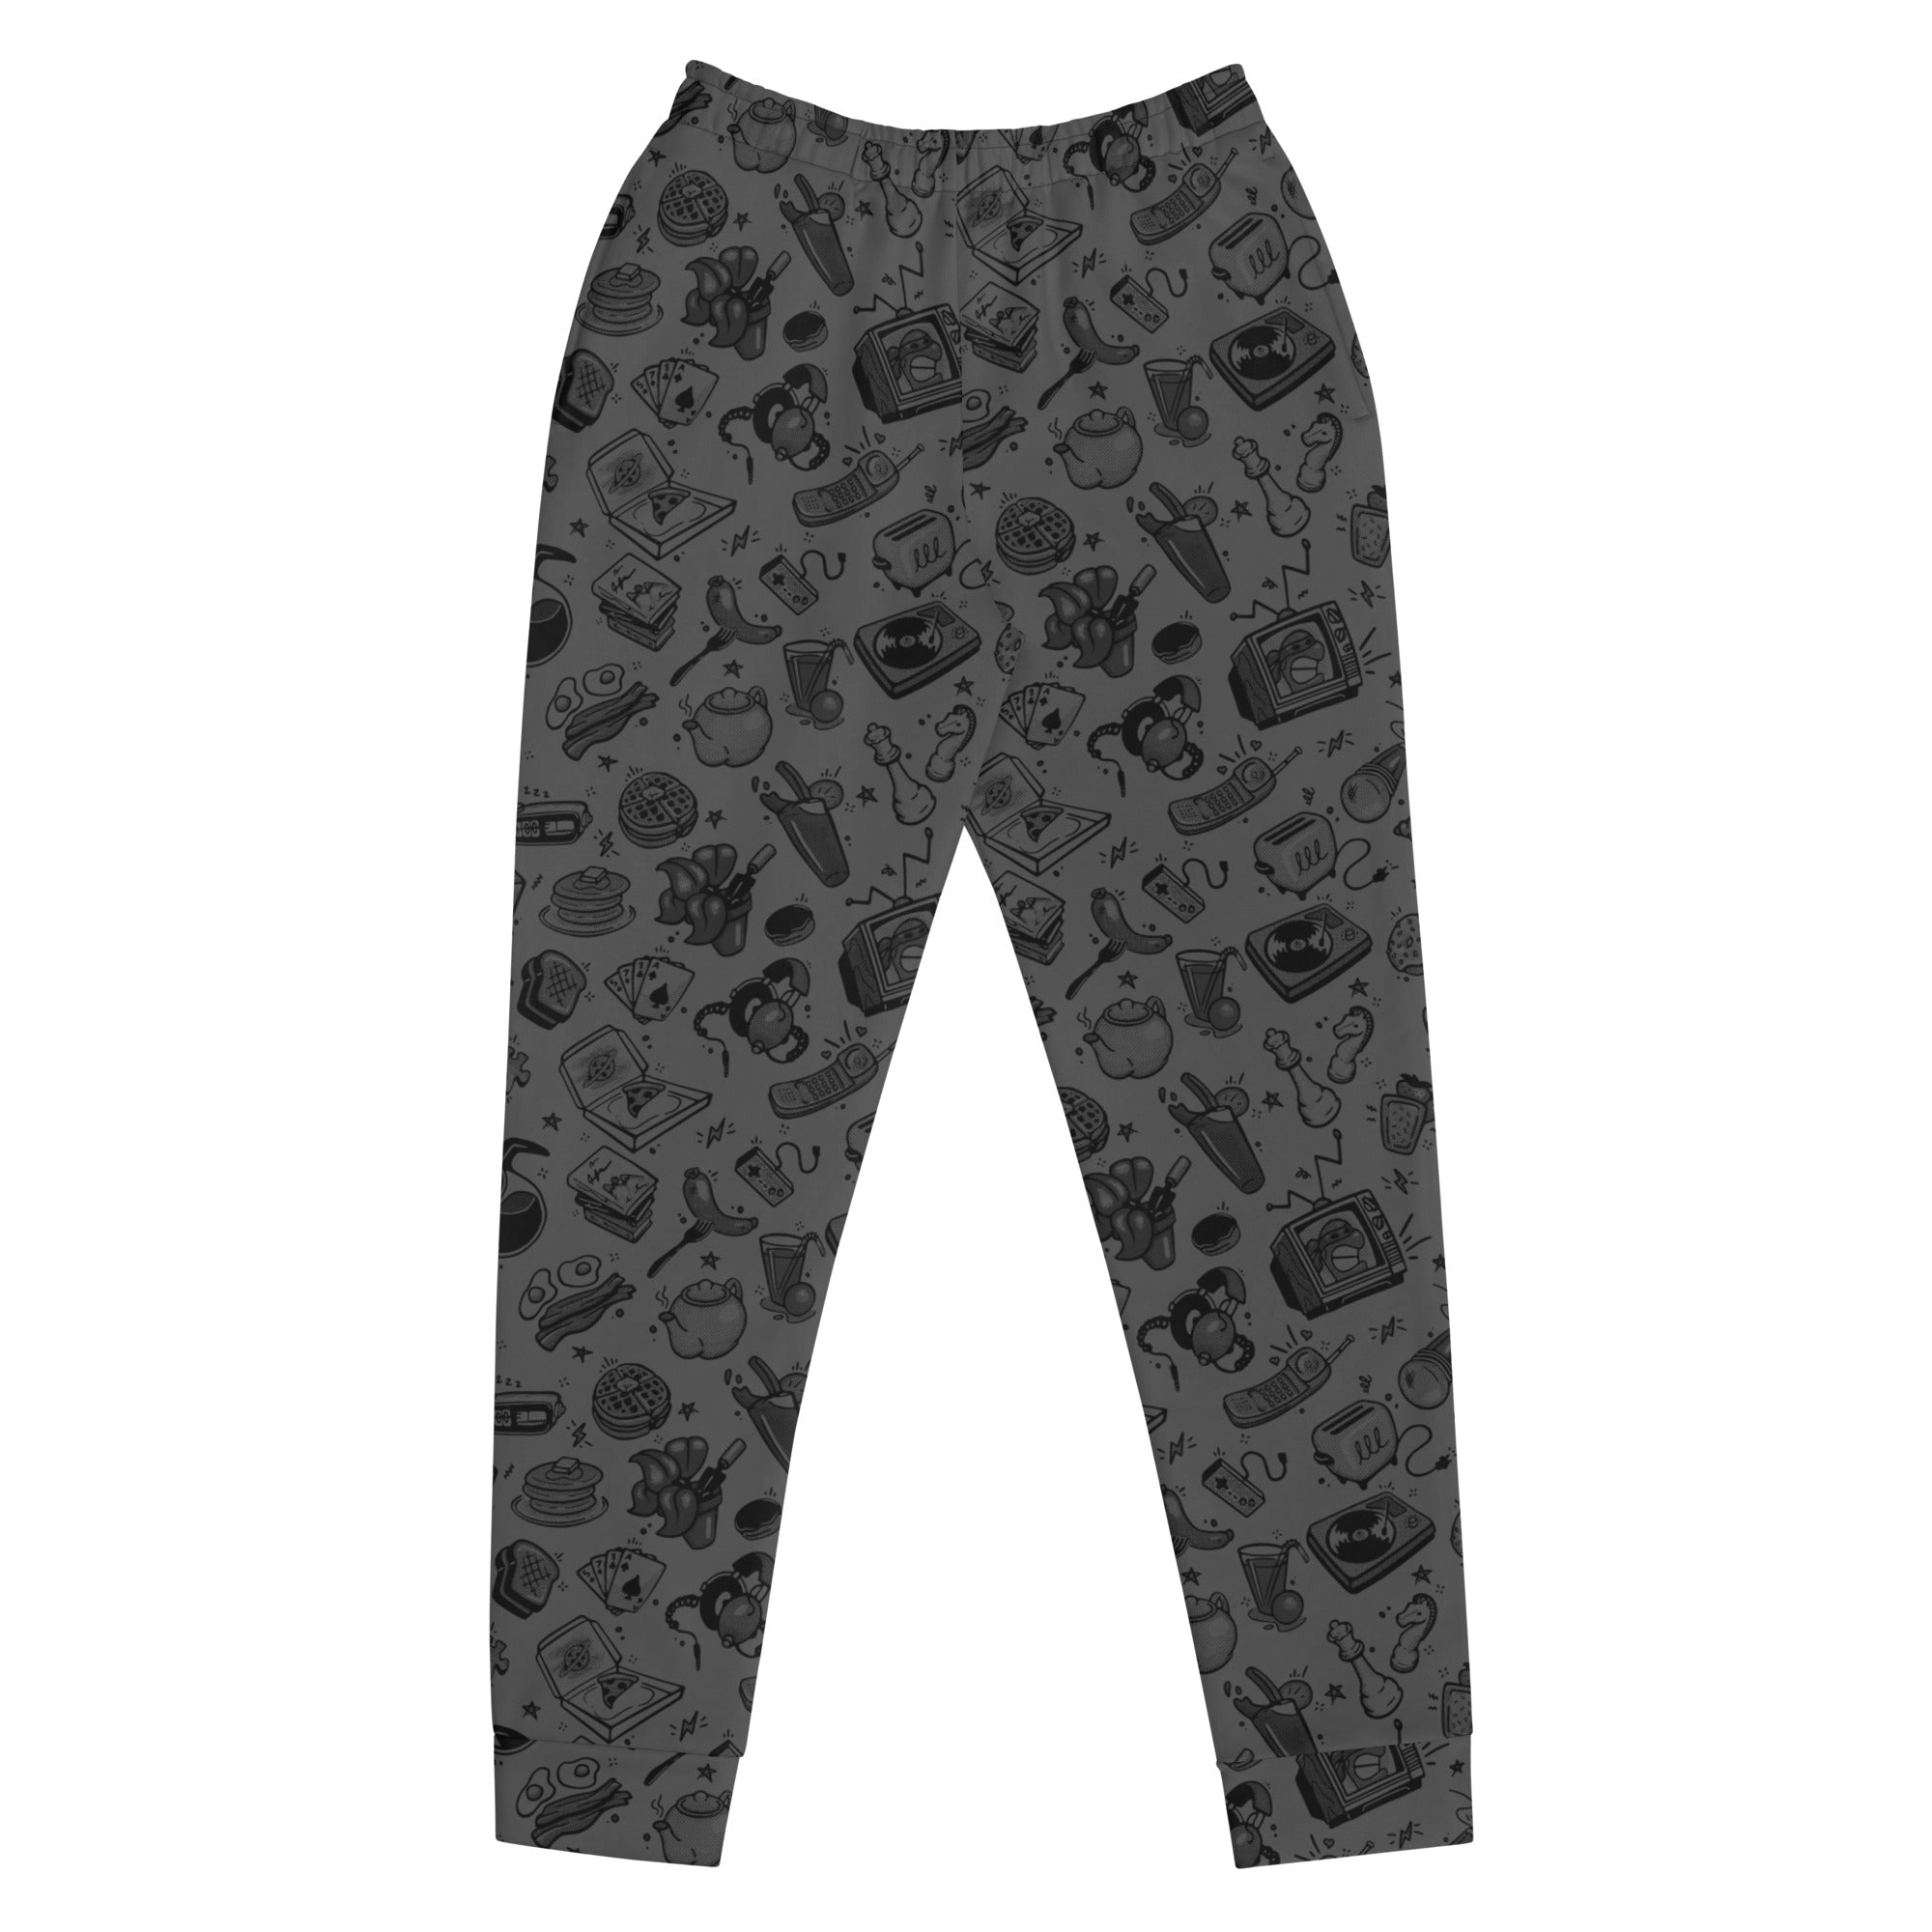 The Morning Women's Joggers